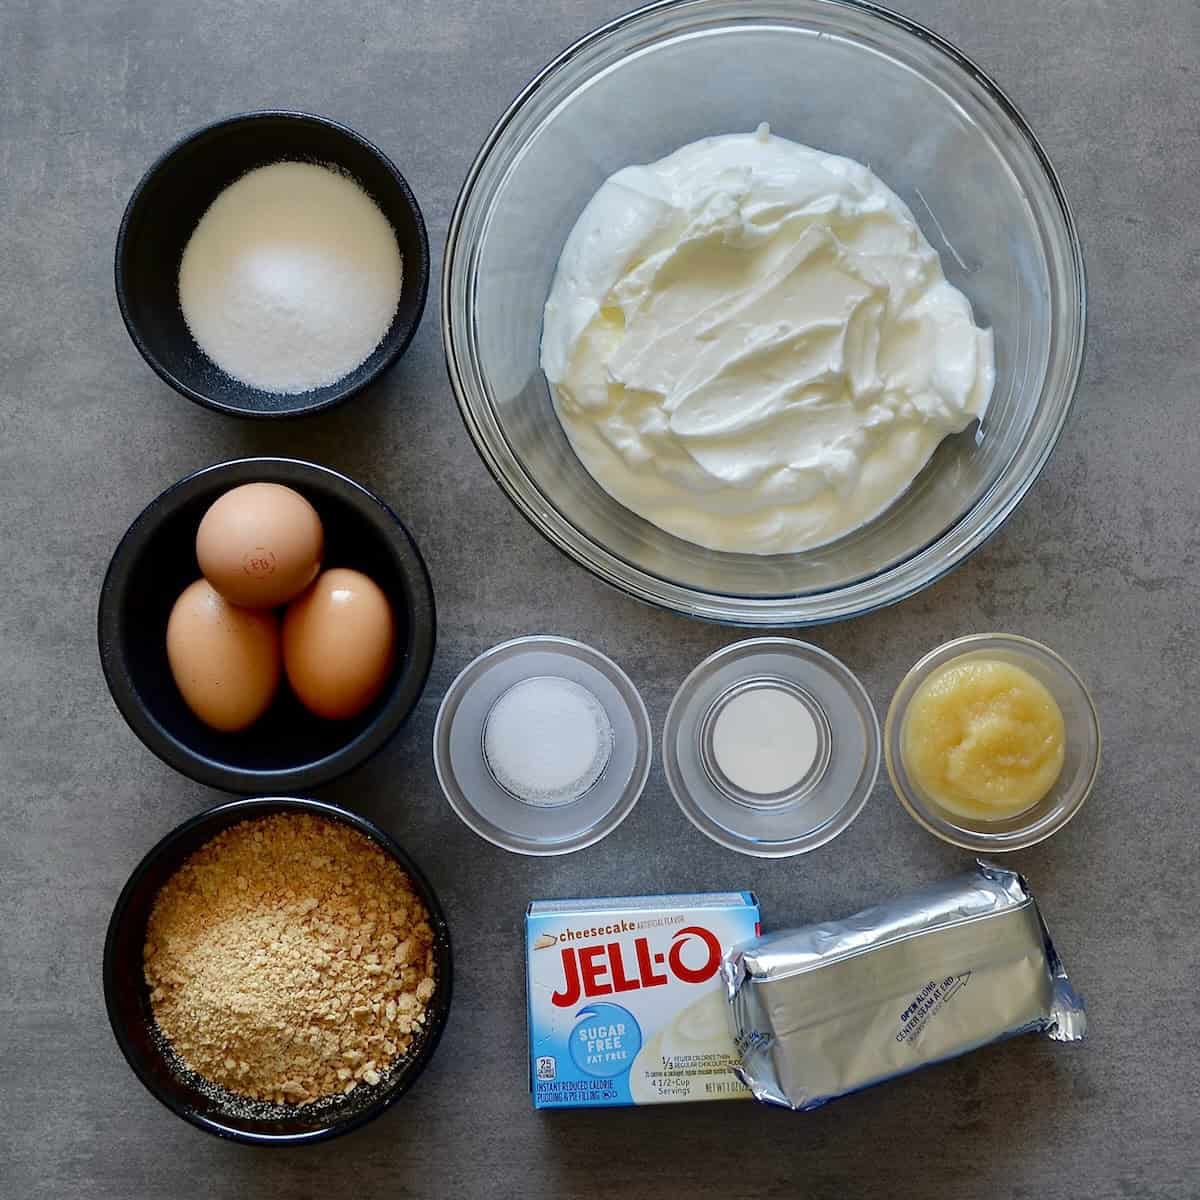 Measured ingredients for cheesecake recipe